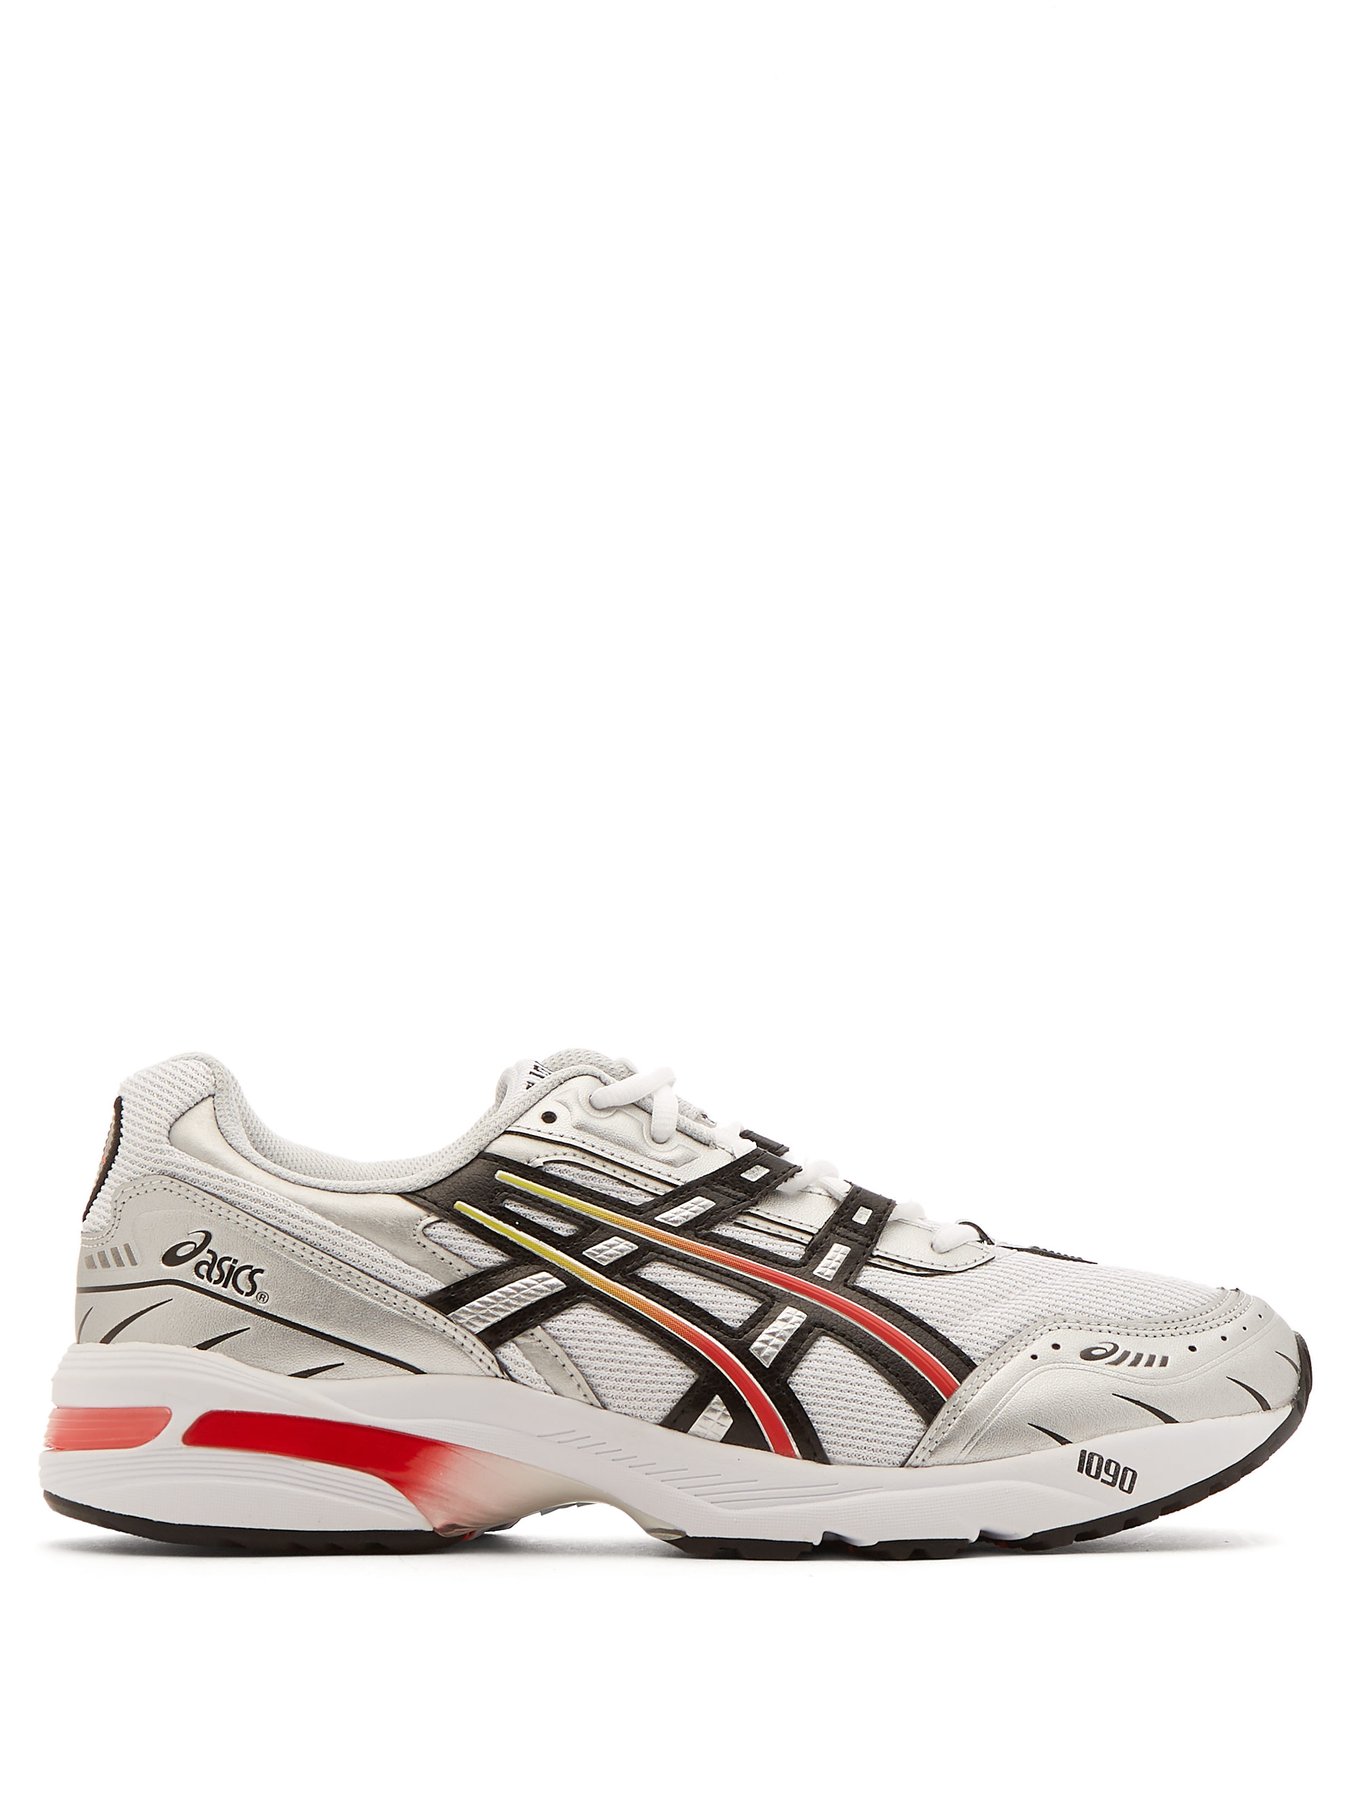 asics gel leather trainers